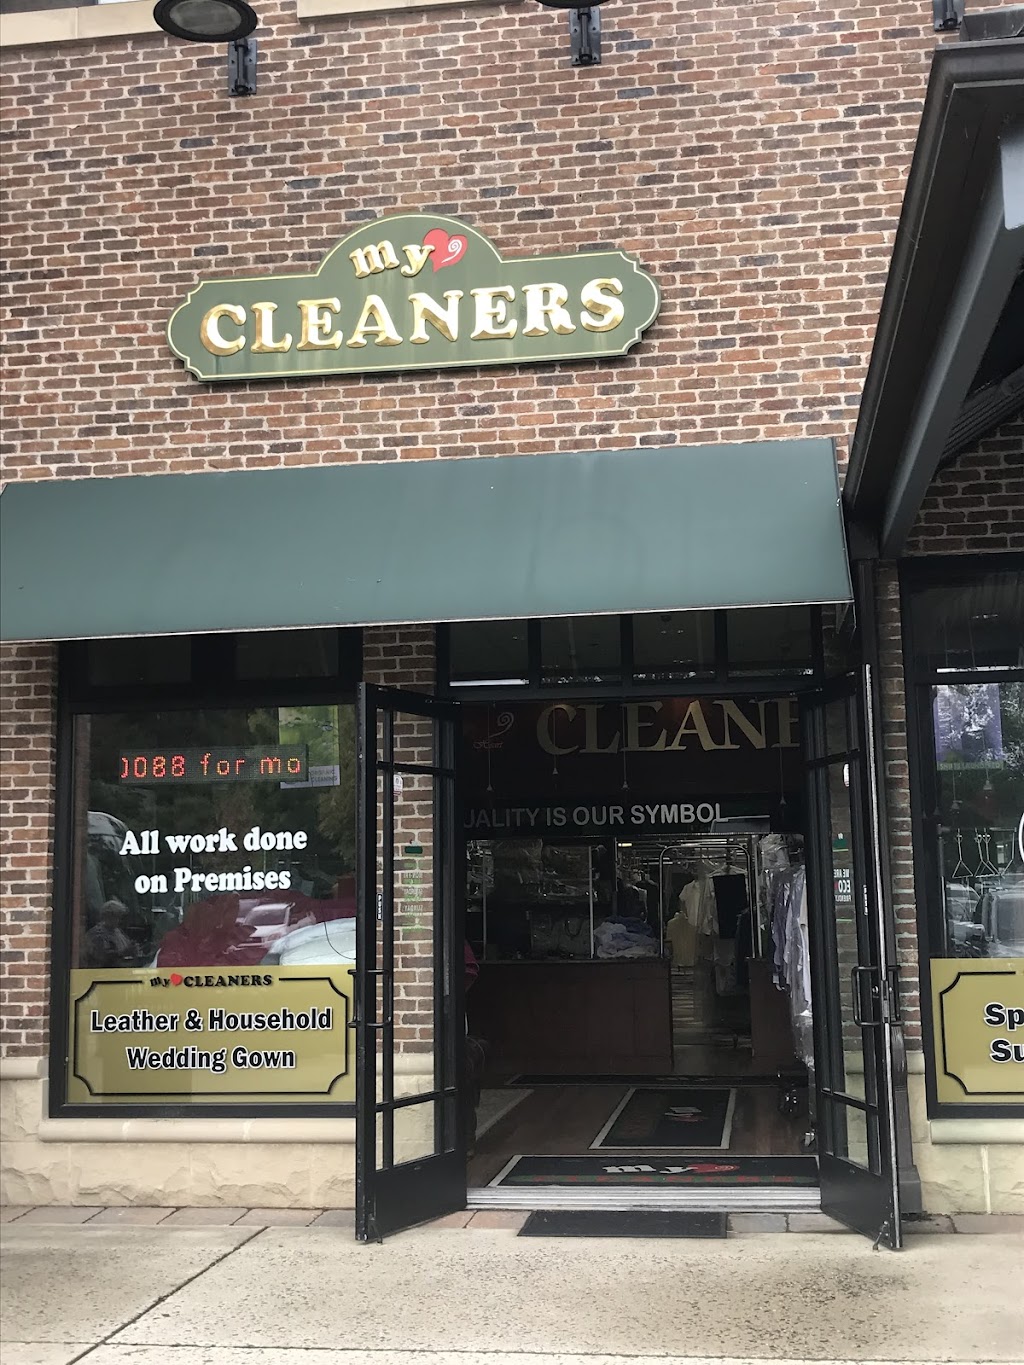 My heart clearner & tailor shop | 25 Mountainview Blvd, Basking Ridge, NJ 07920 | Phone: (908) 647-0088